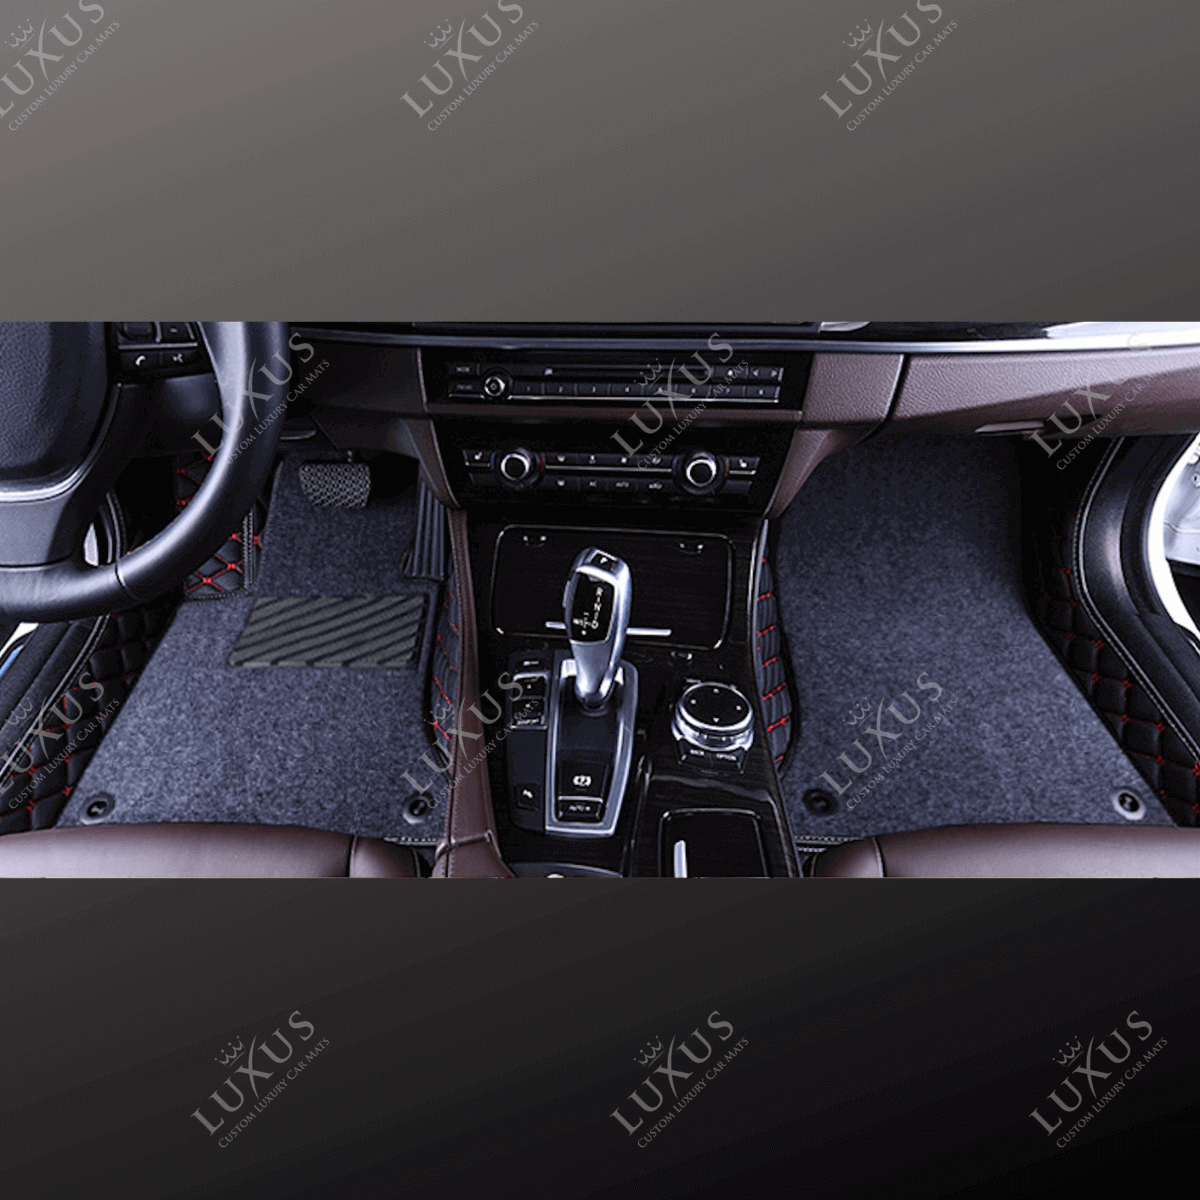 Floor Mats For Car, Truck & SUV Luxus Car Mats Custom All-Weather  Waterproof Diamond Auto Floor Liner Carpets Rugs Black & Red Stitching